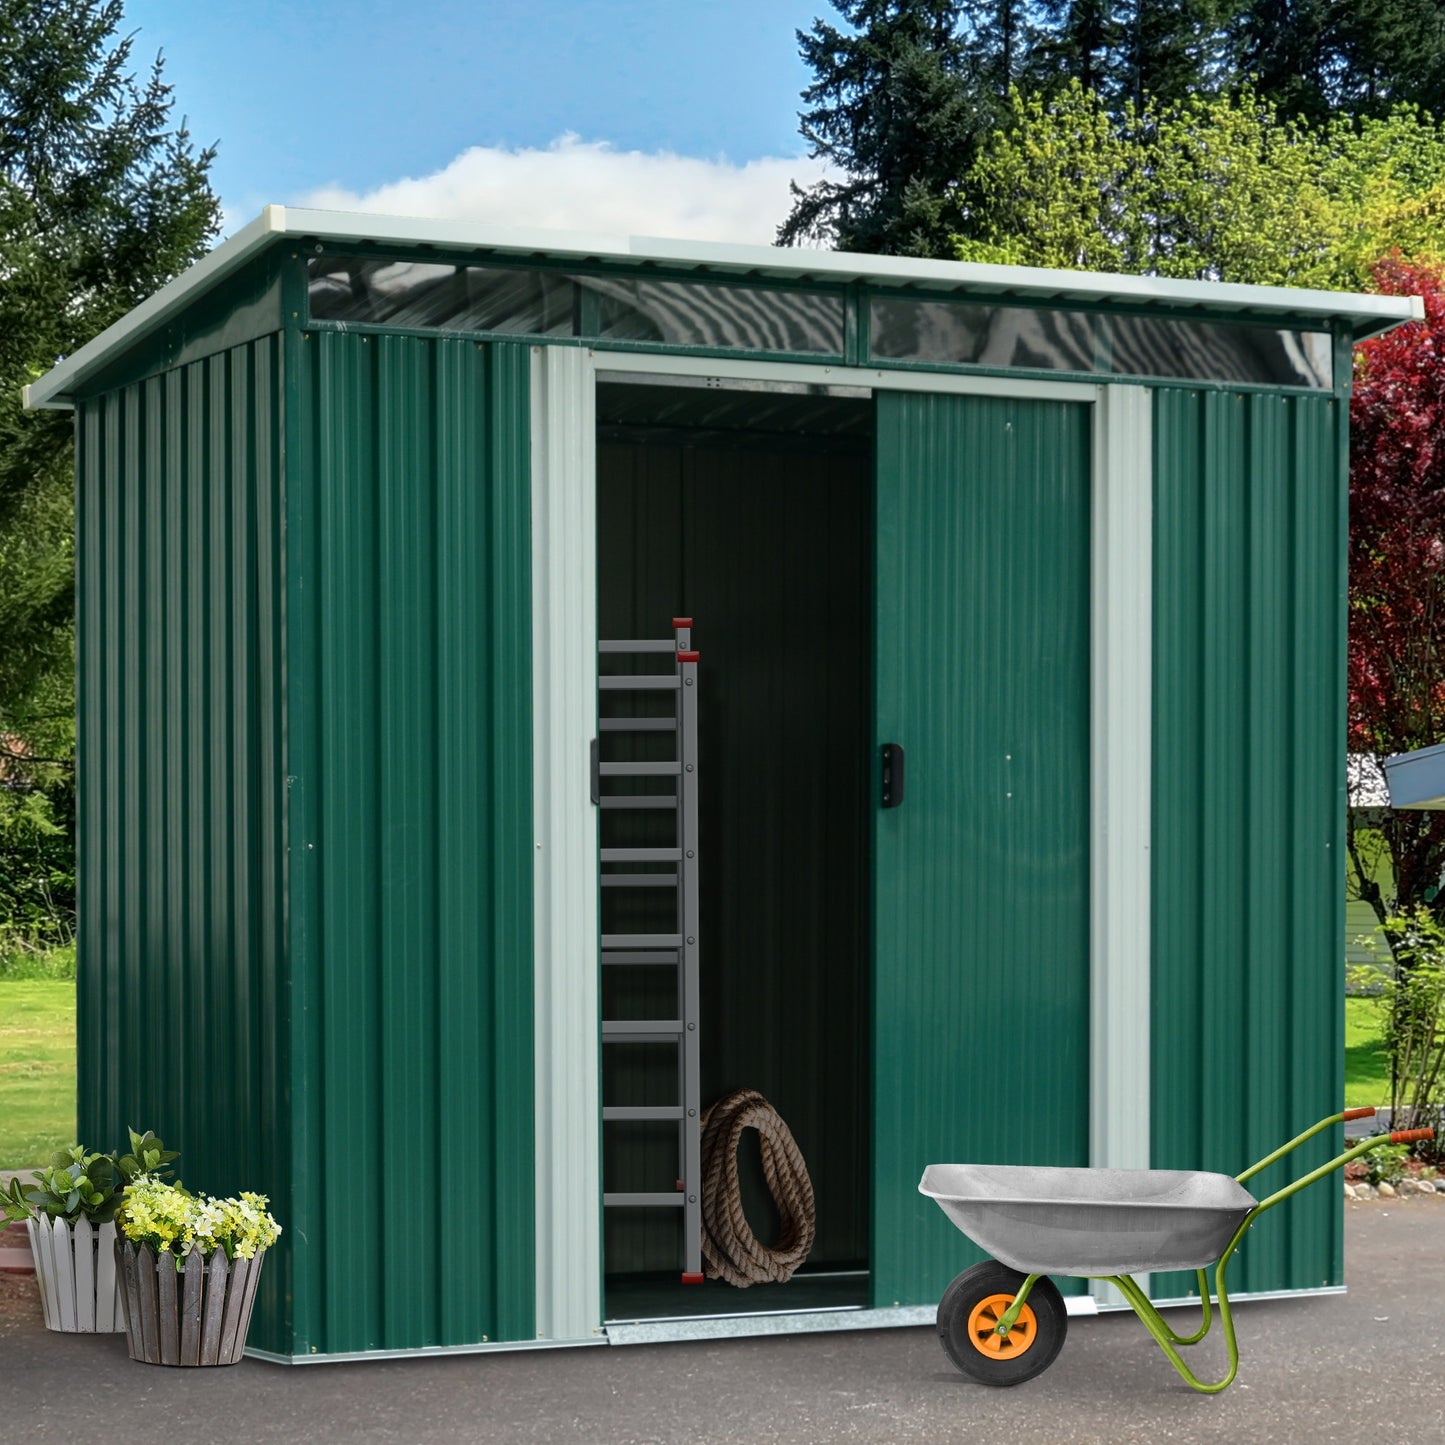 Outsunny 6 x 8ft Corrugated Steel Garden Shed - Green